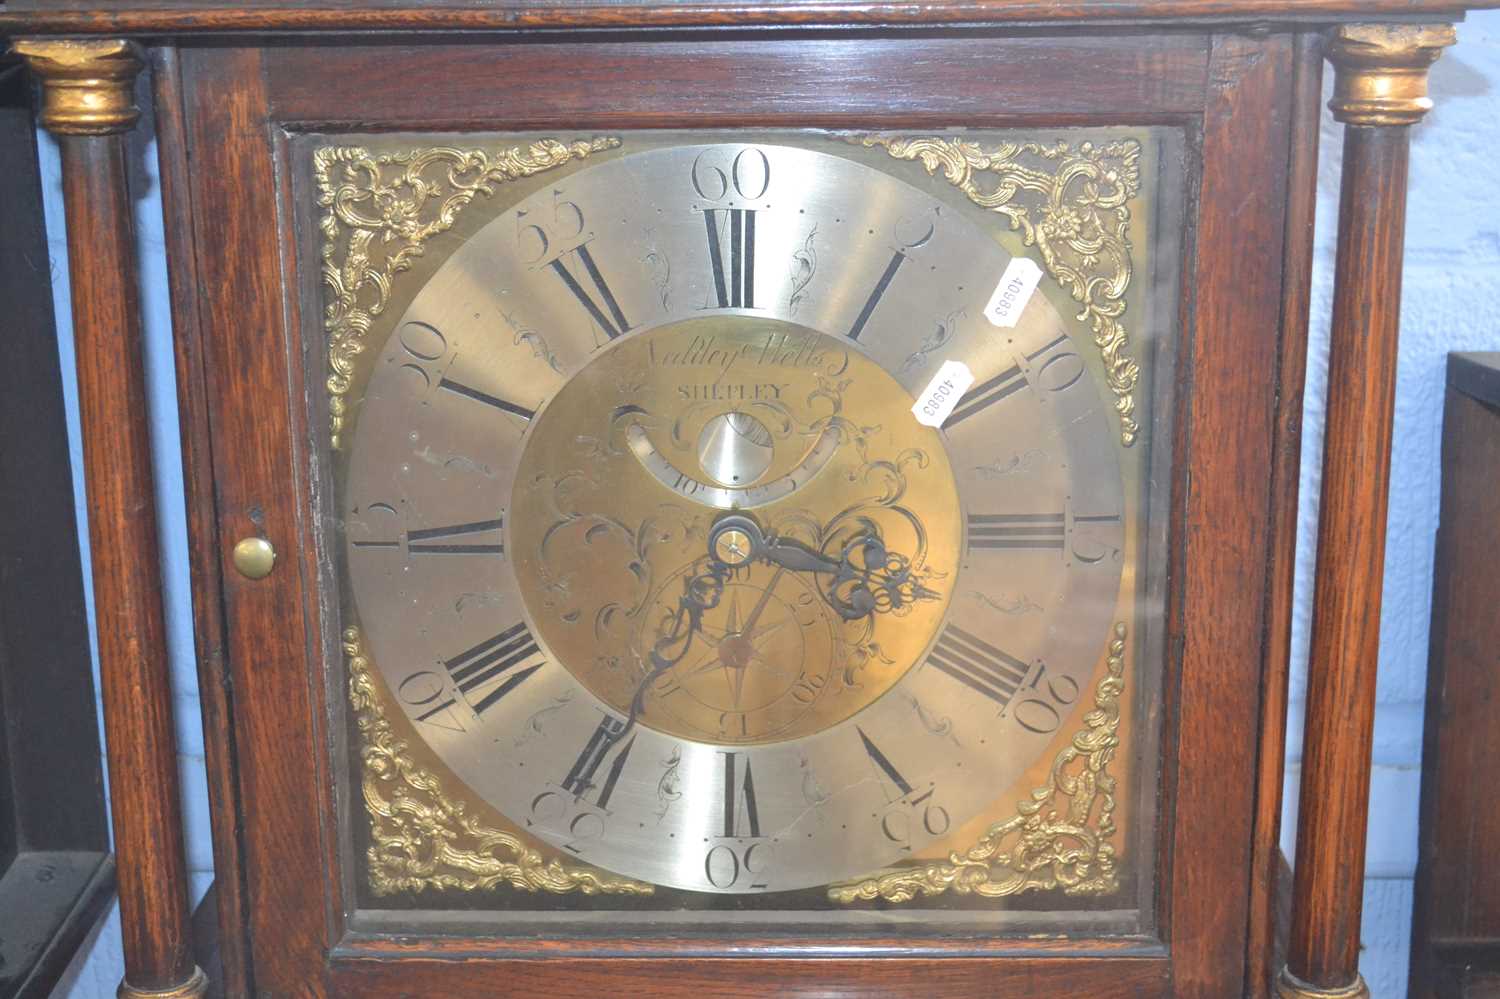 Neddey Wells Shepley, Georgian oak cased long case clock with brass dial and thirty hour movement - Image 2 of 2